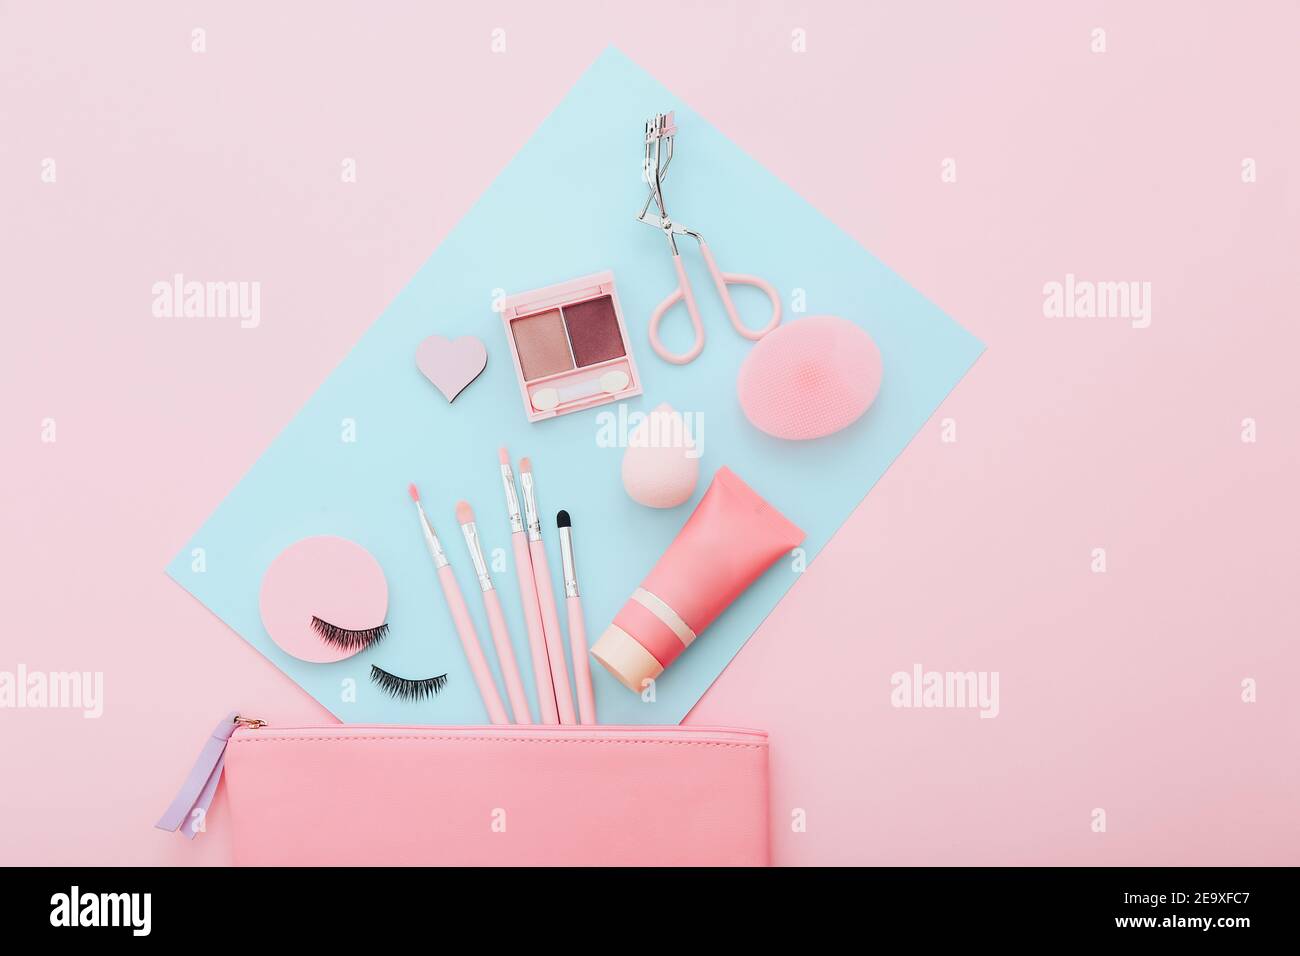 Makeup tools and accessories on blue and pink background. Beauty concept. Flat lay composition, top view Stock Photo